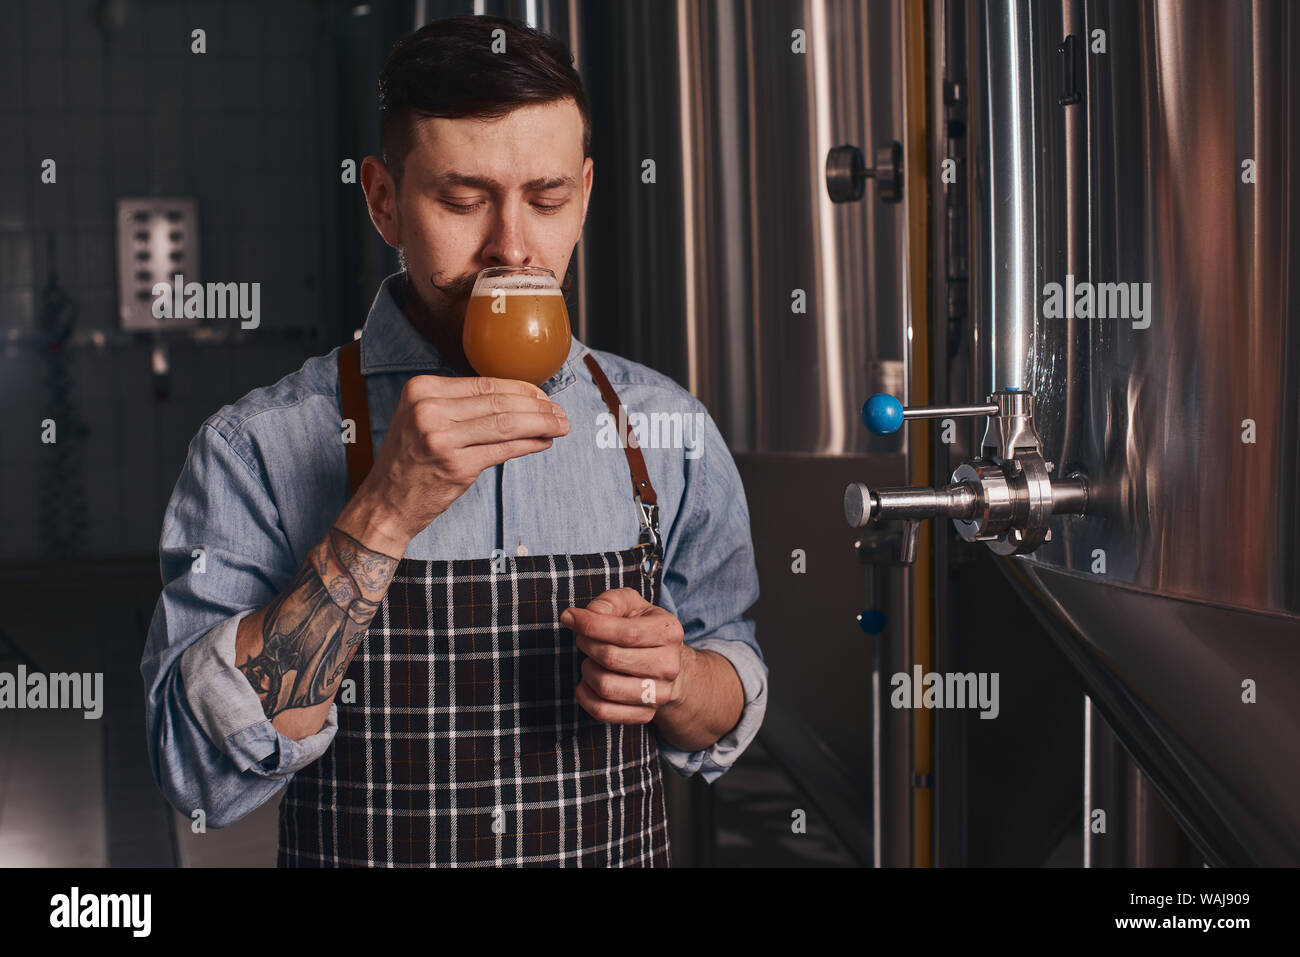 Tattooed man in tartan apron and denim shirt with a beard tastes beer from the glass he holds. Stock Photo